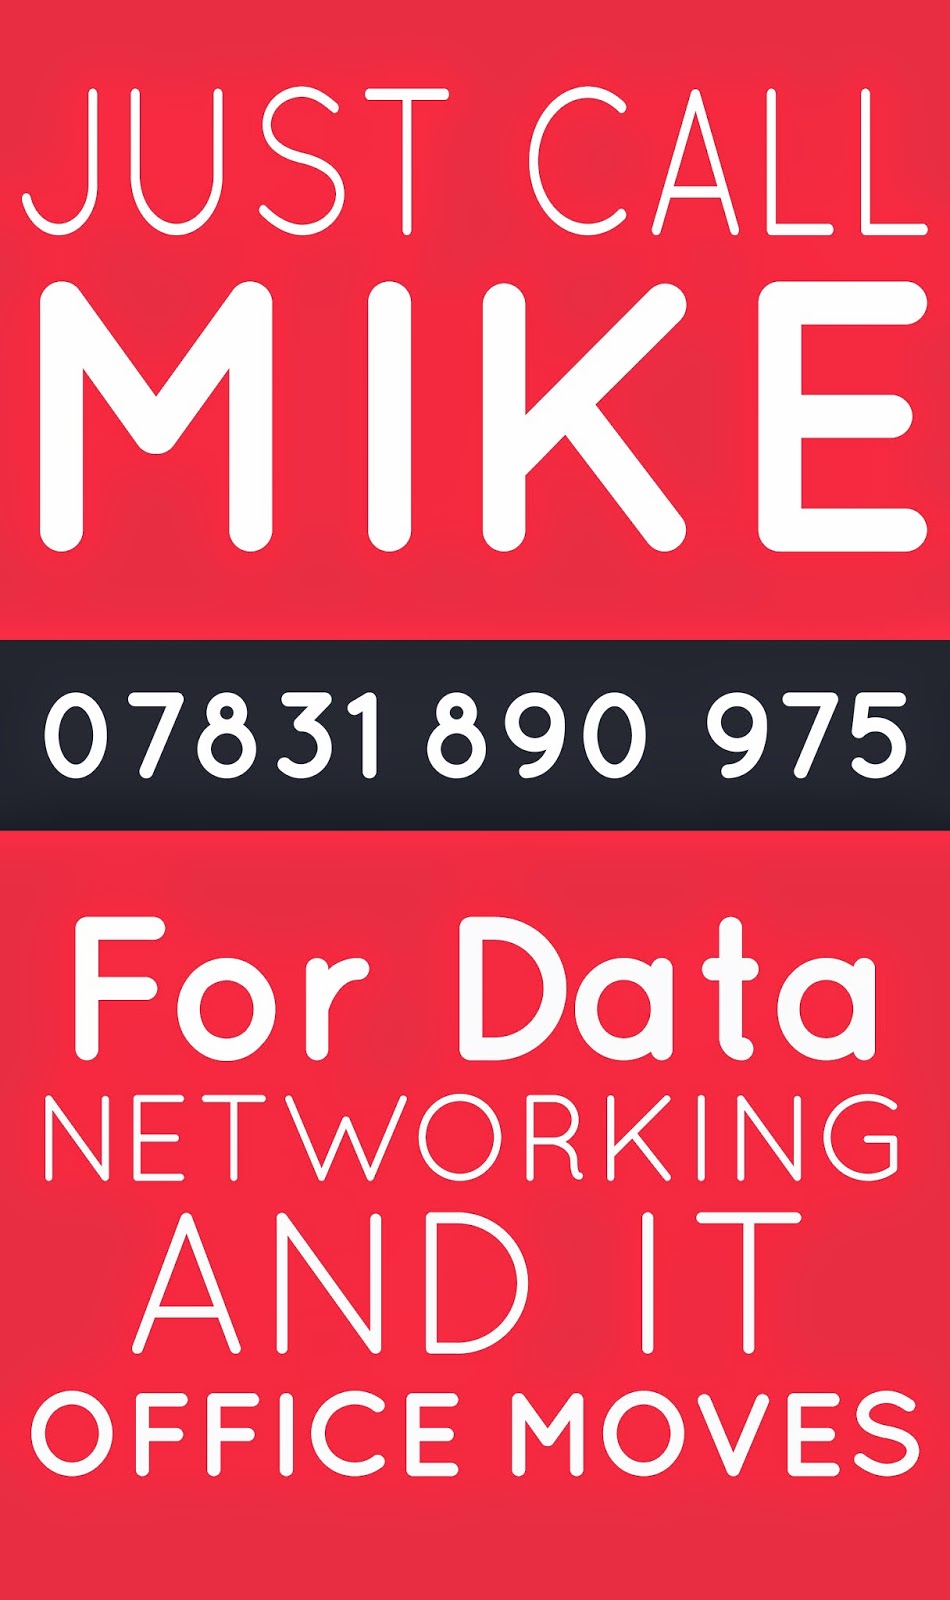 Article by Mike Belletty, Data Cabling Installer